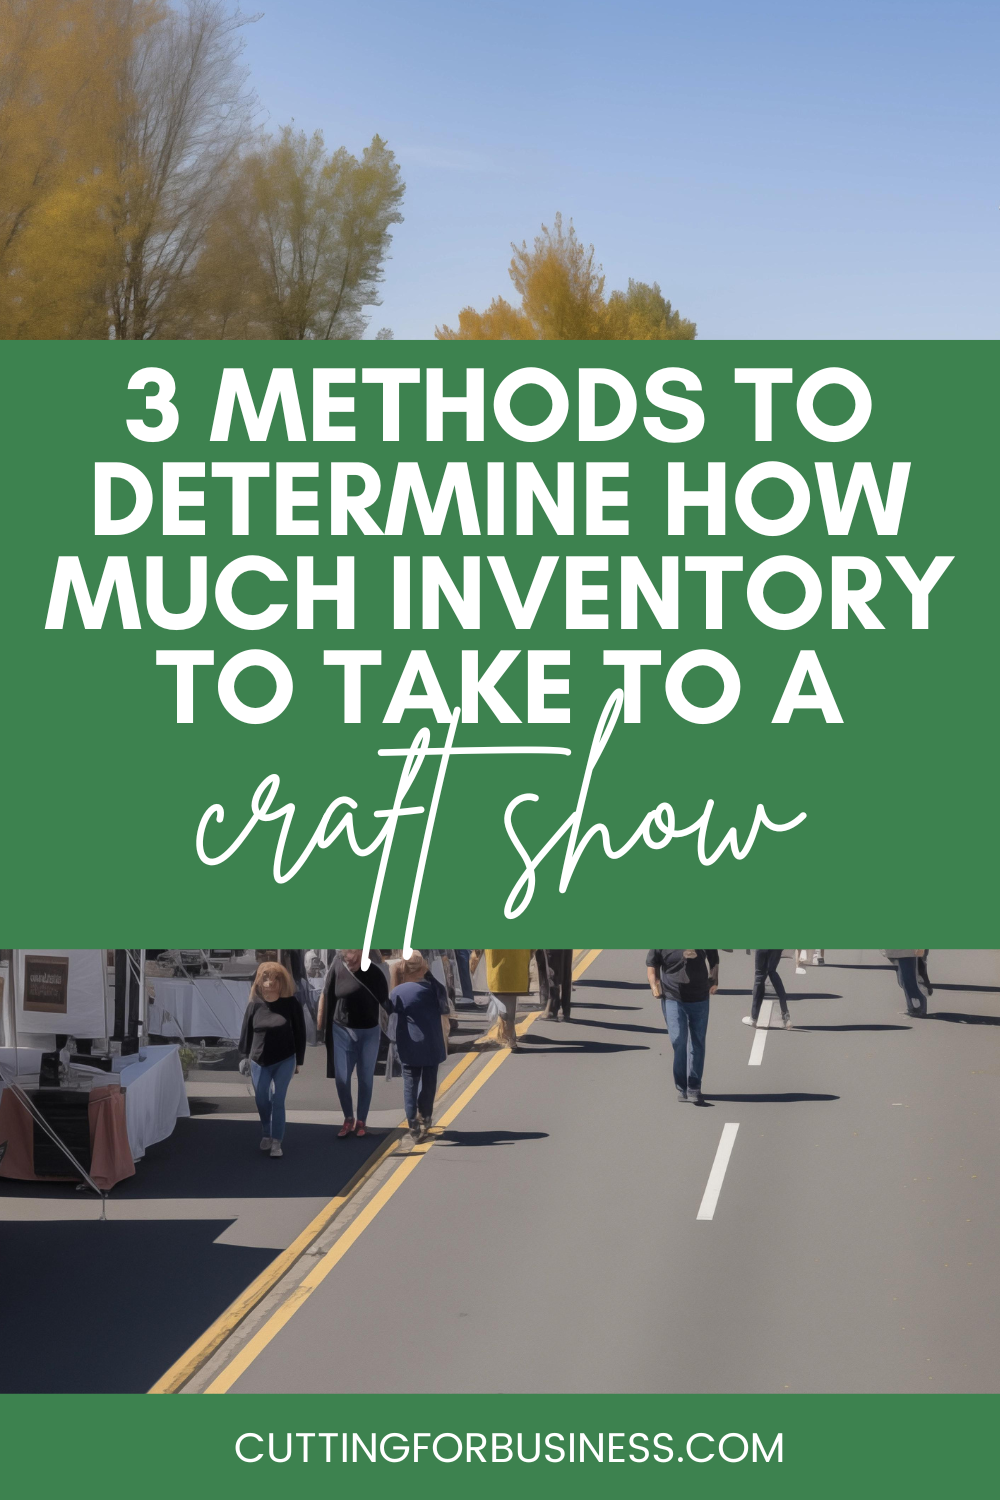 3 Methods to Determine How Much Inventory to Take to a Craft Show - cuttingforbusiness.com